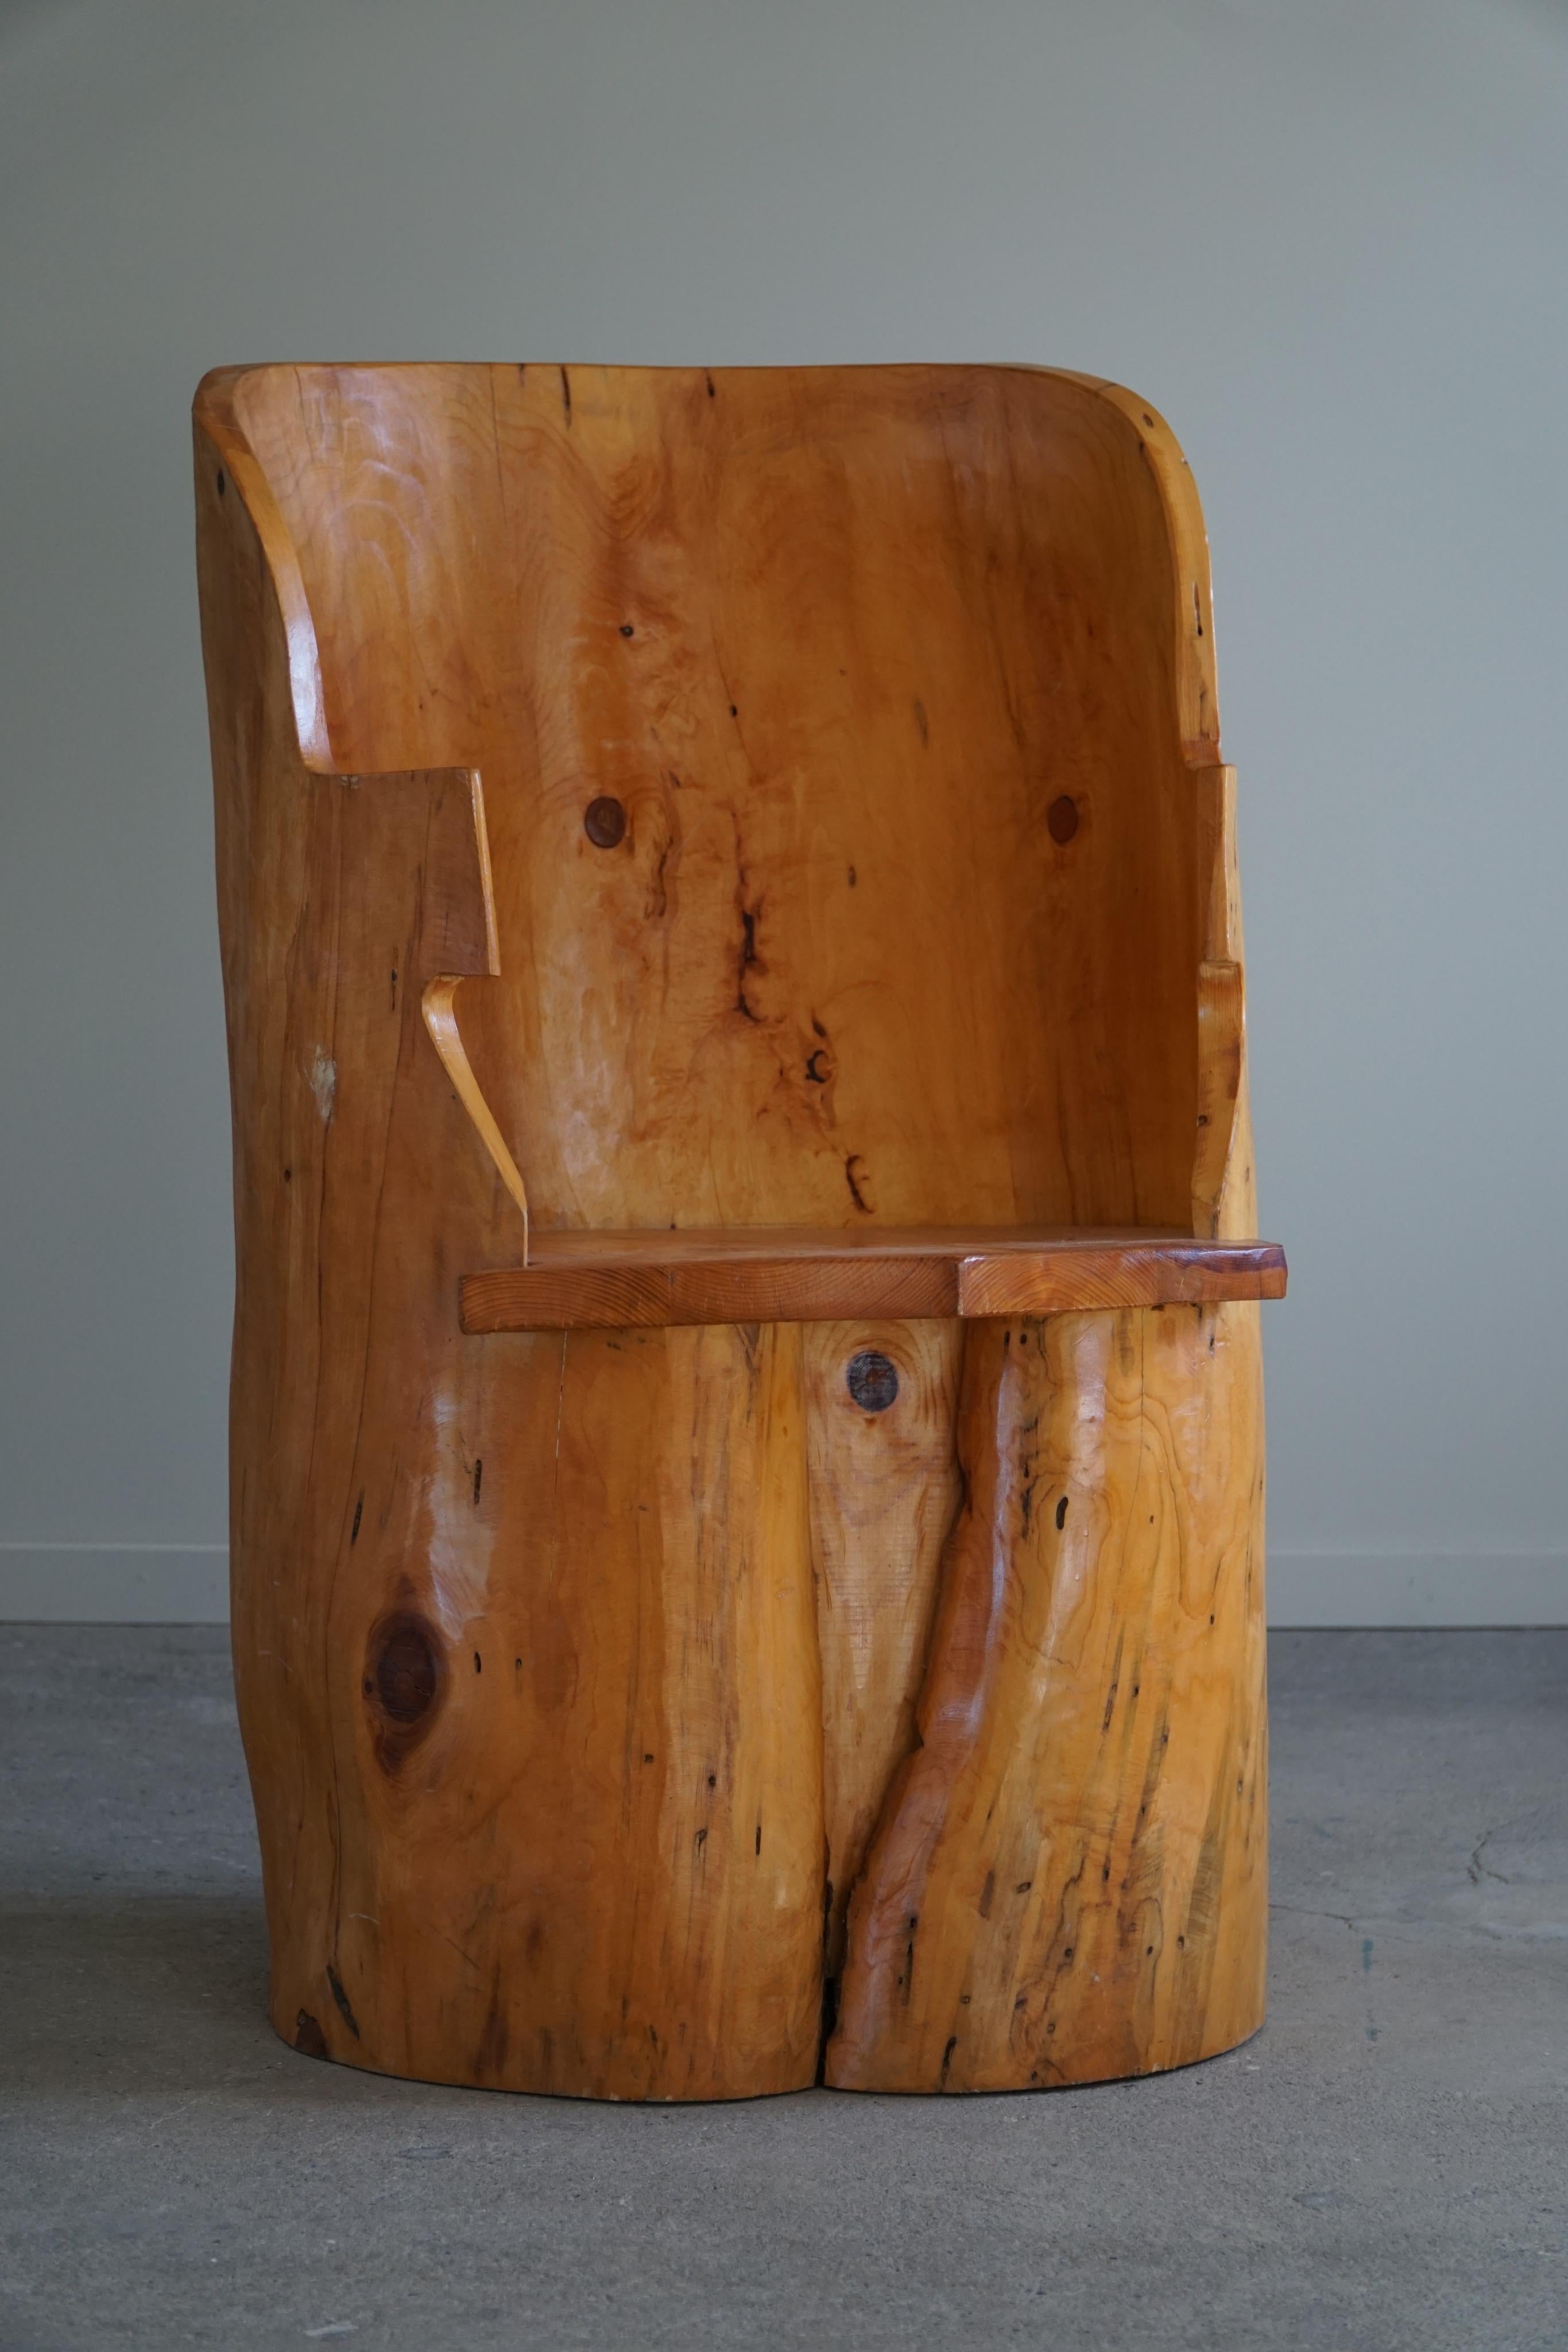 Stump Chair in Solid Birch by a Swedish Cabinetmaker, Wabi Sabi, 1950s For Sale 13